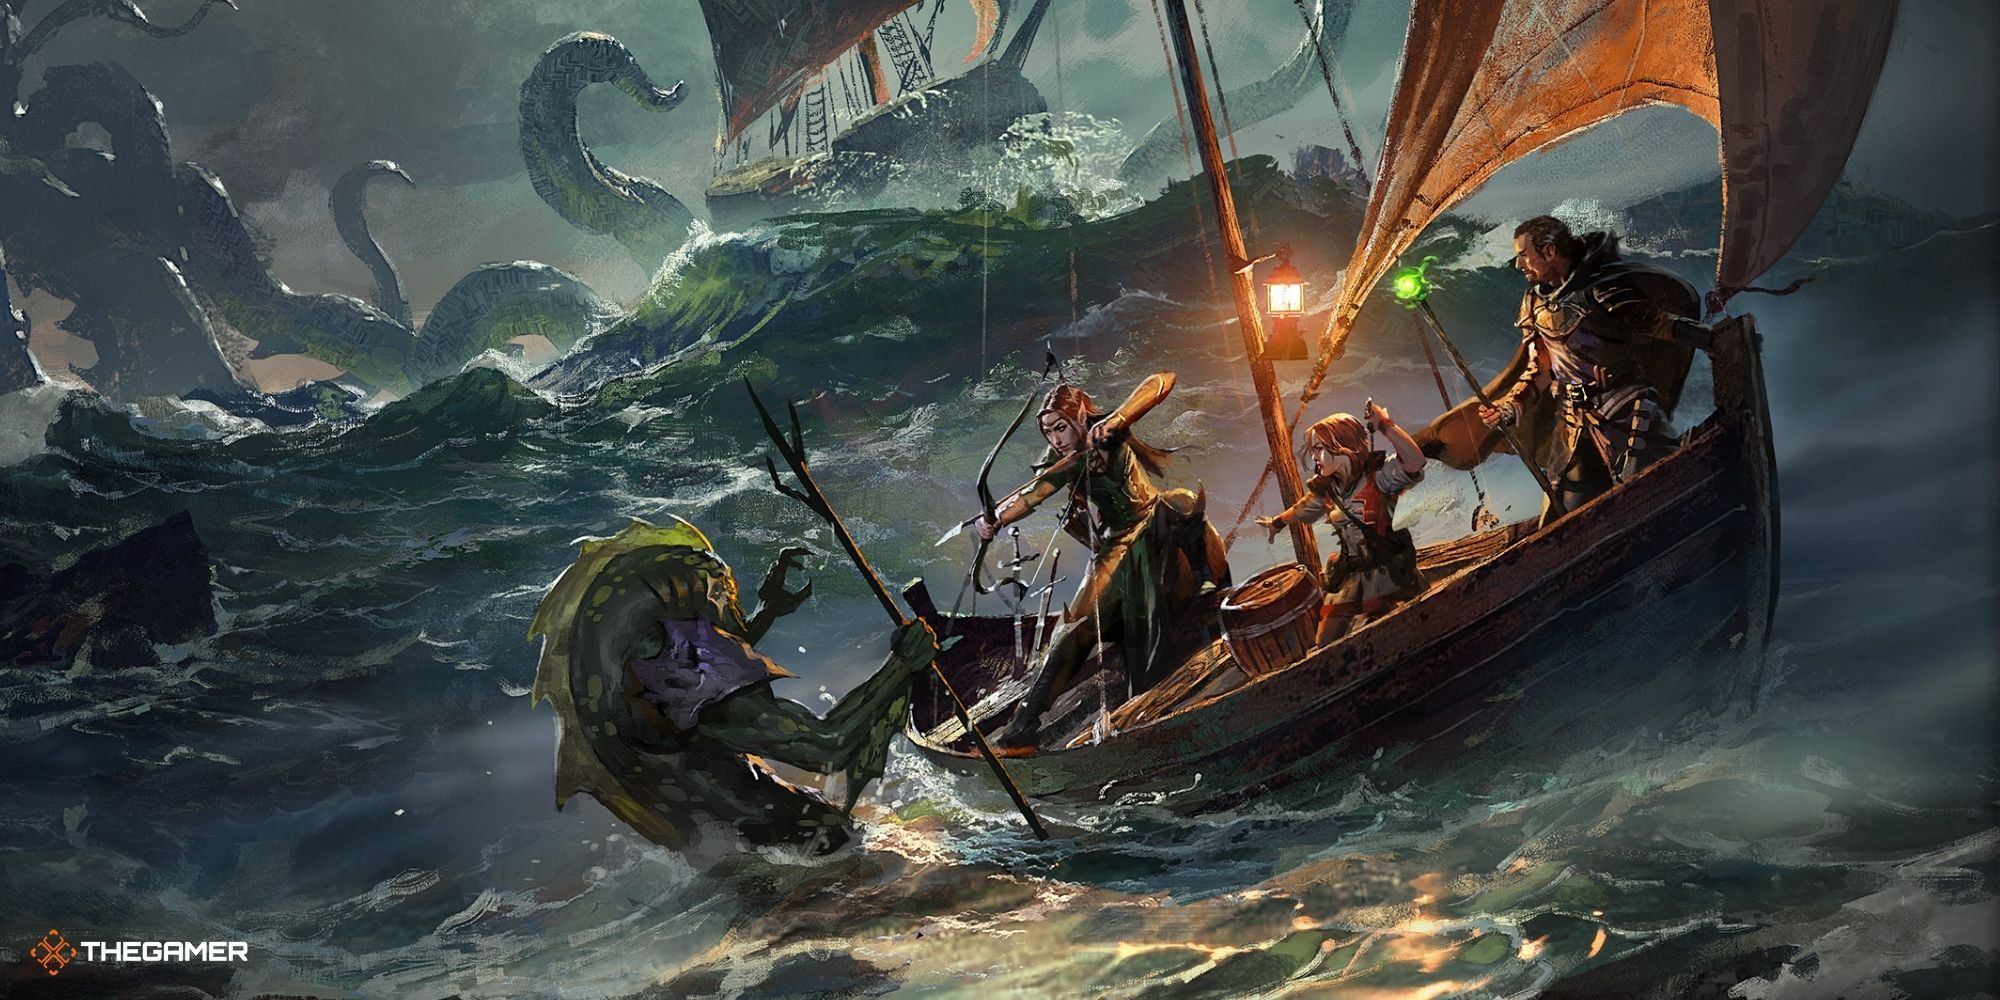 Dungeons and Dragons - official art of adventurers on a boat